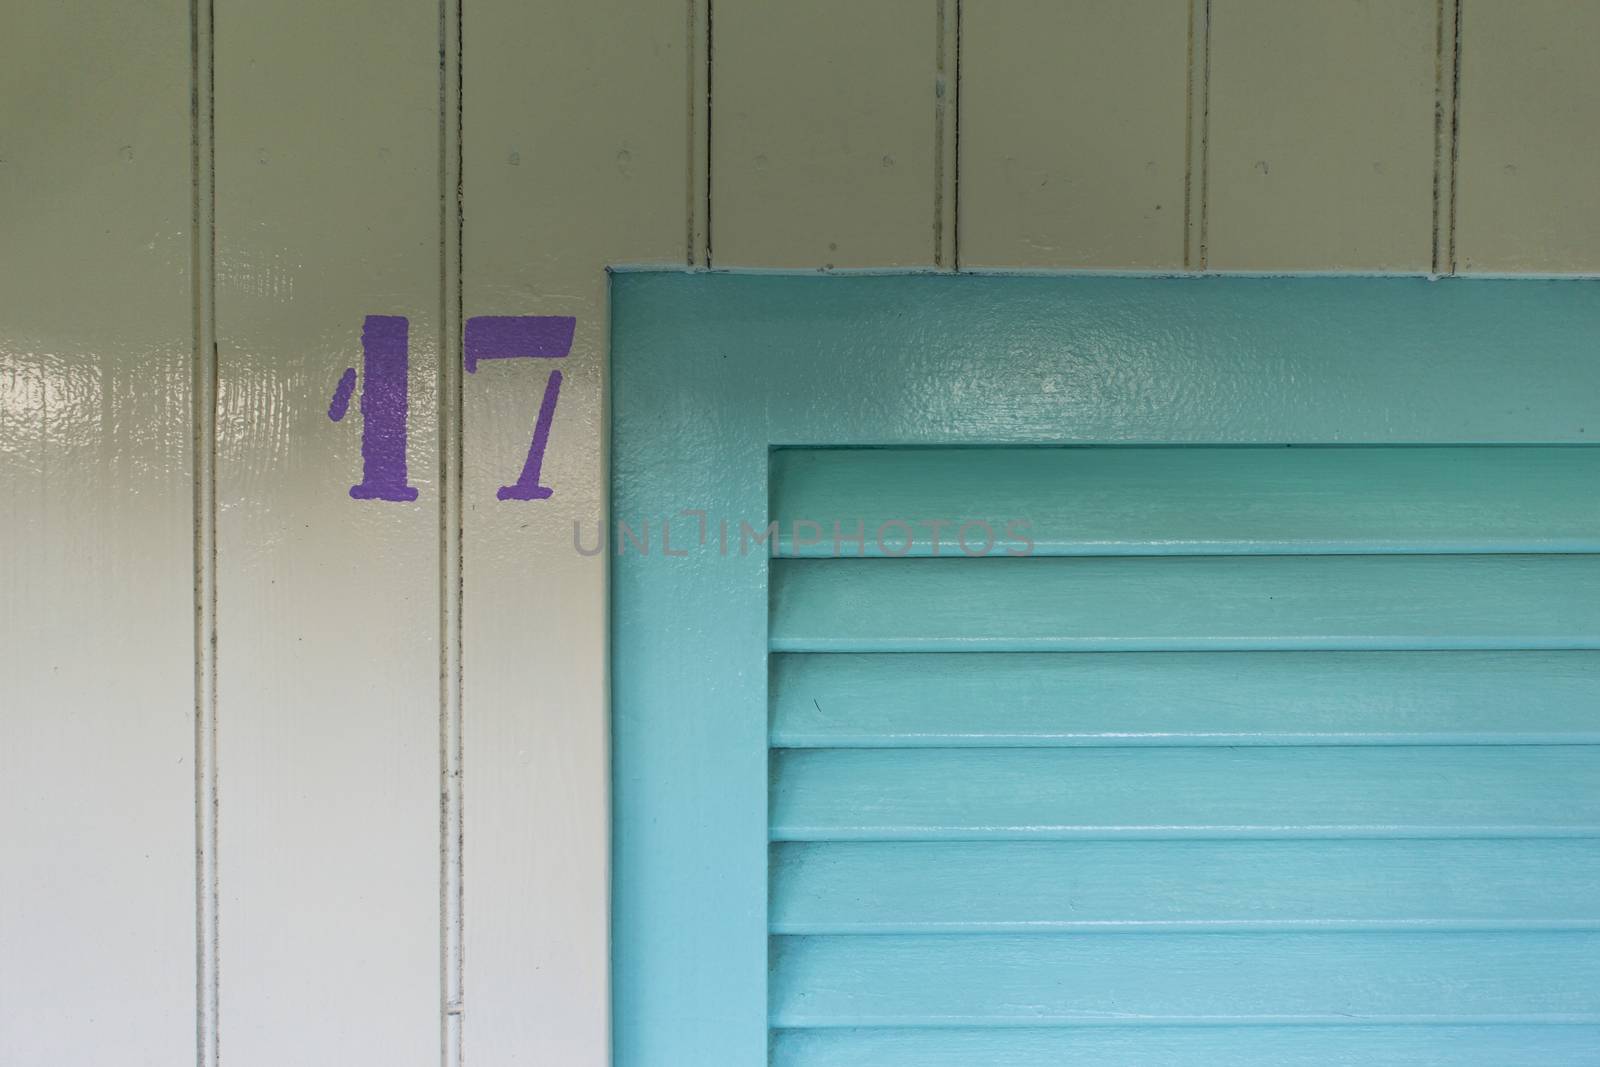 Close-up of a detail of the cabin number 17